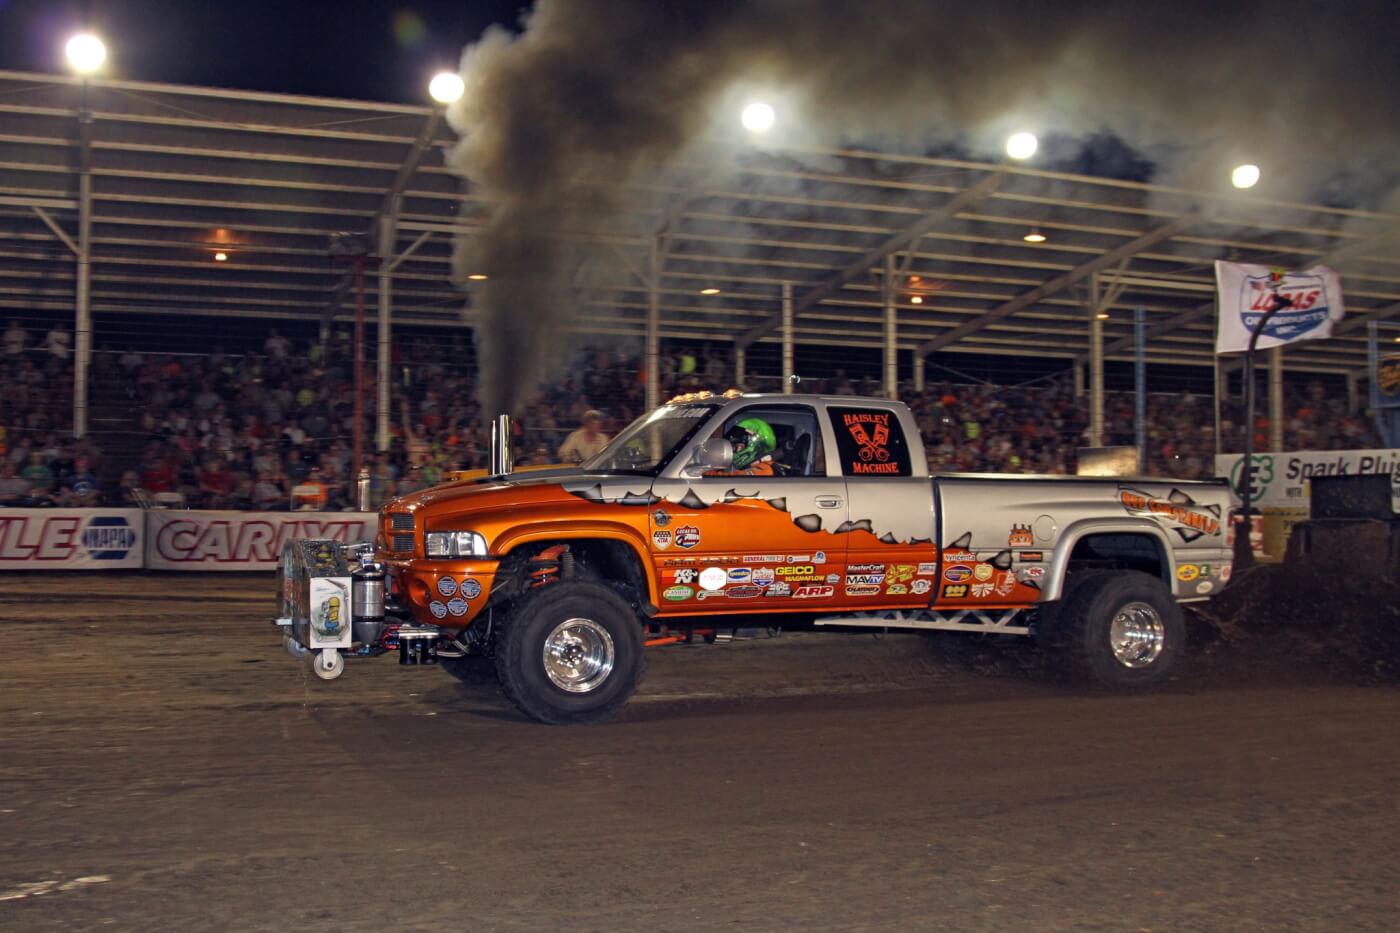 Carey Clark drove Curt Haisley's "Off Constantly" truck to victory Friday night in the Pro Street 3.0 class, pulling the sled almost nine feet further than the second place truck.